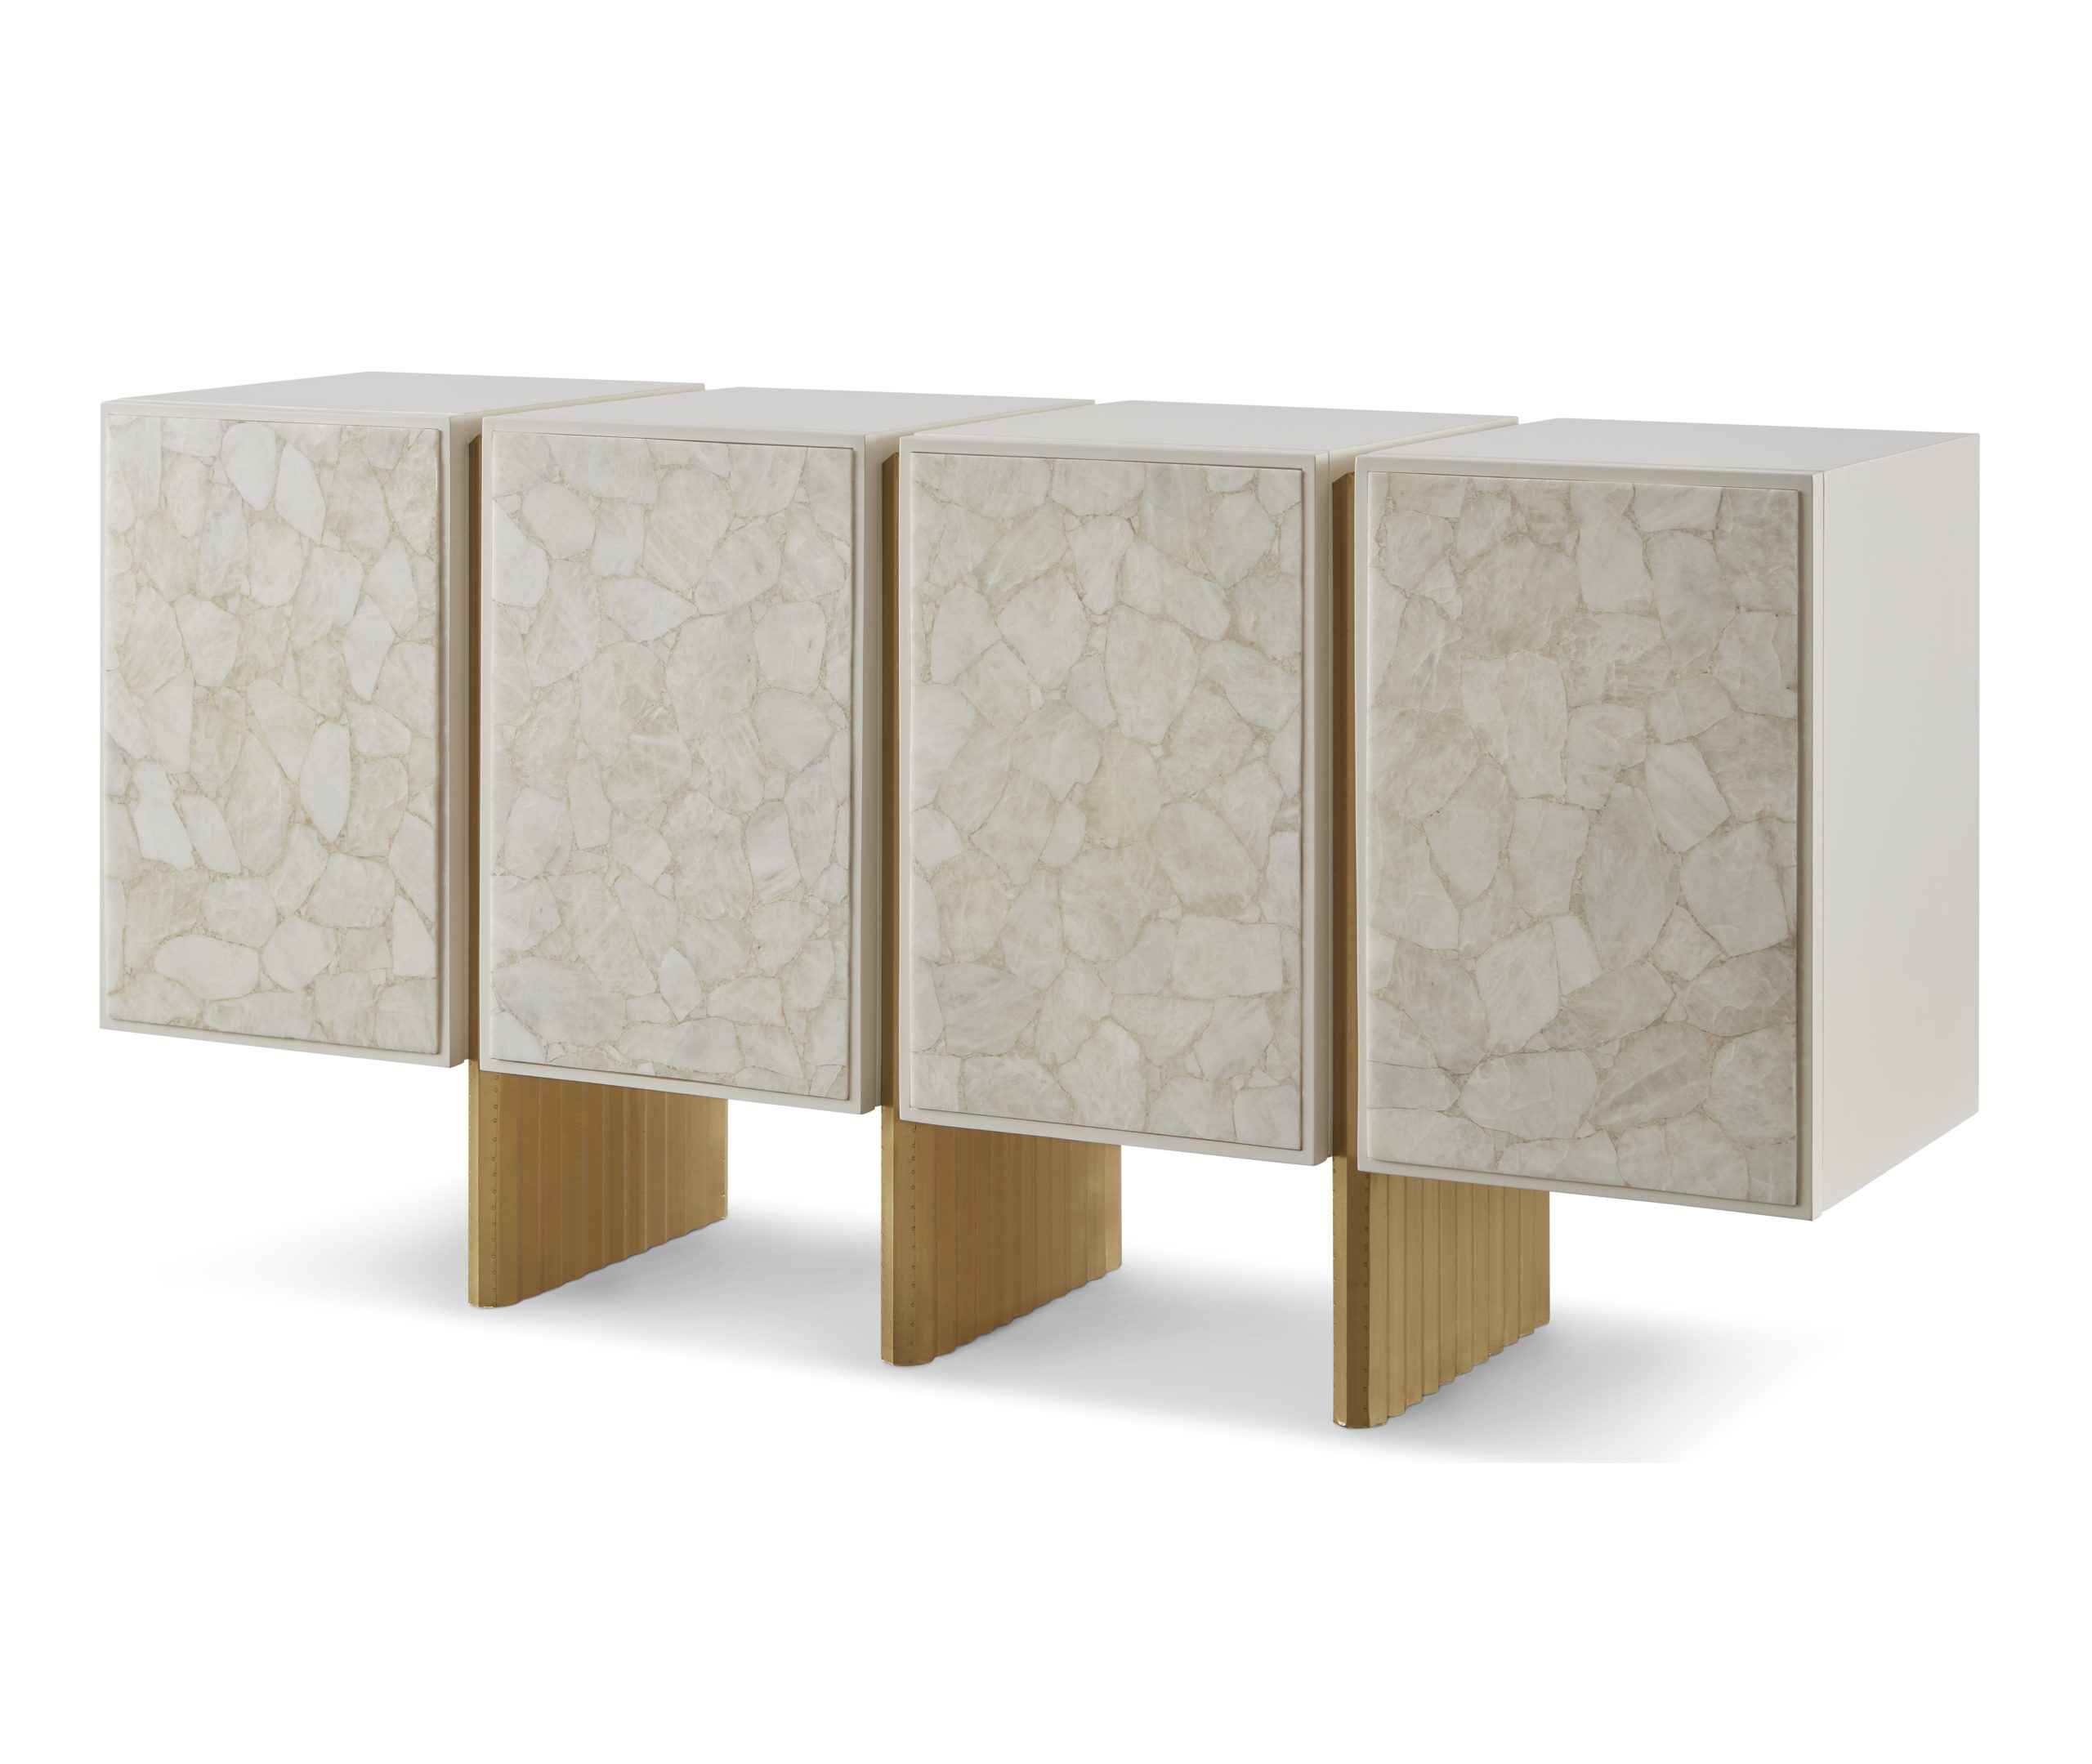 Baker_products_WNWN_kira_credenza_BAA3028_FRONT_3QRT-scaled-1